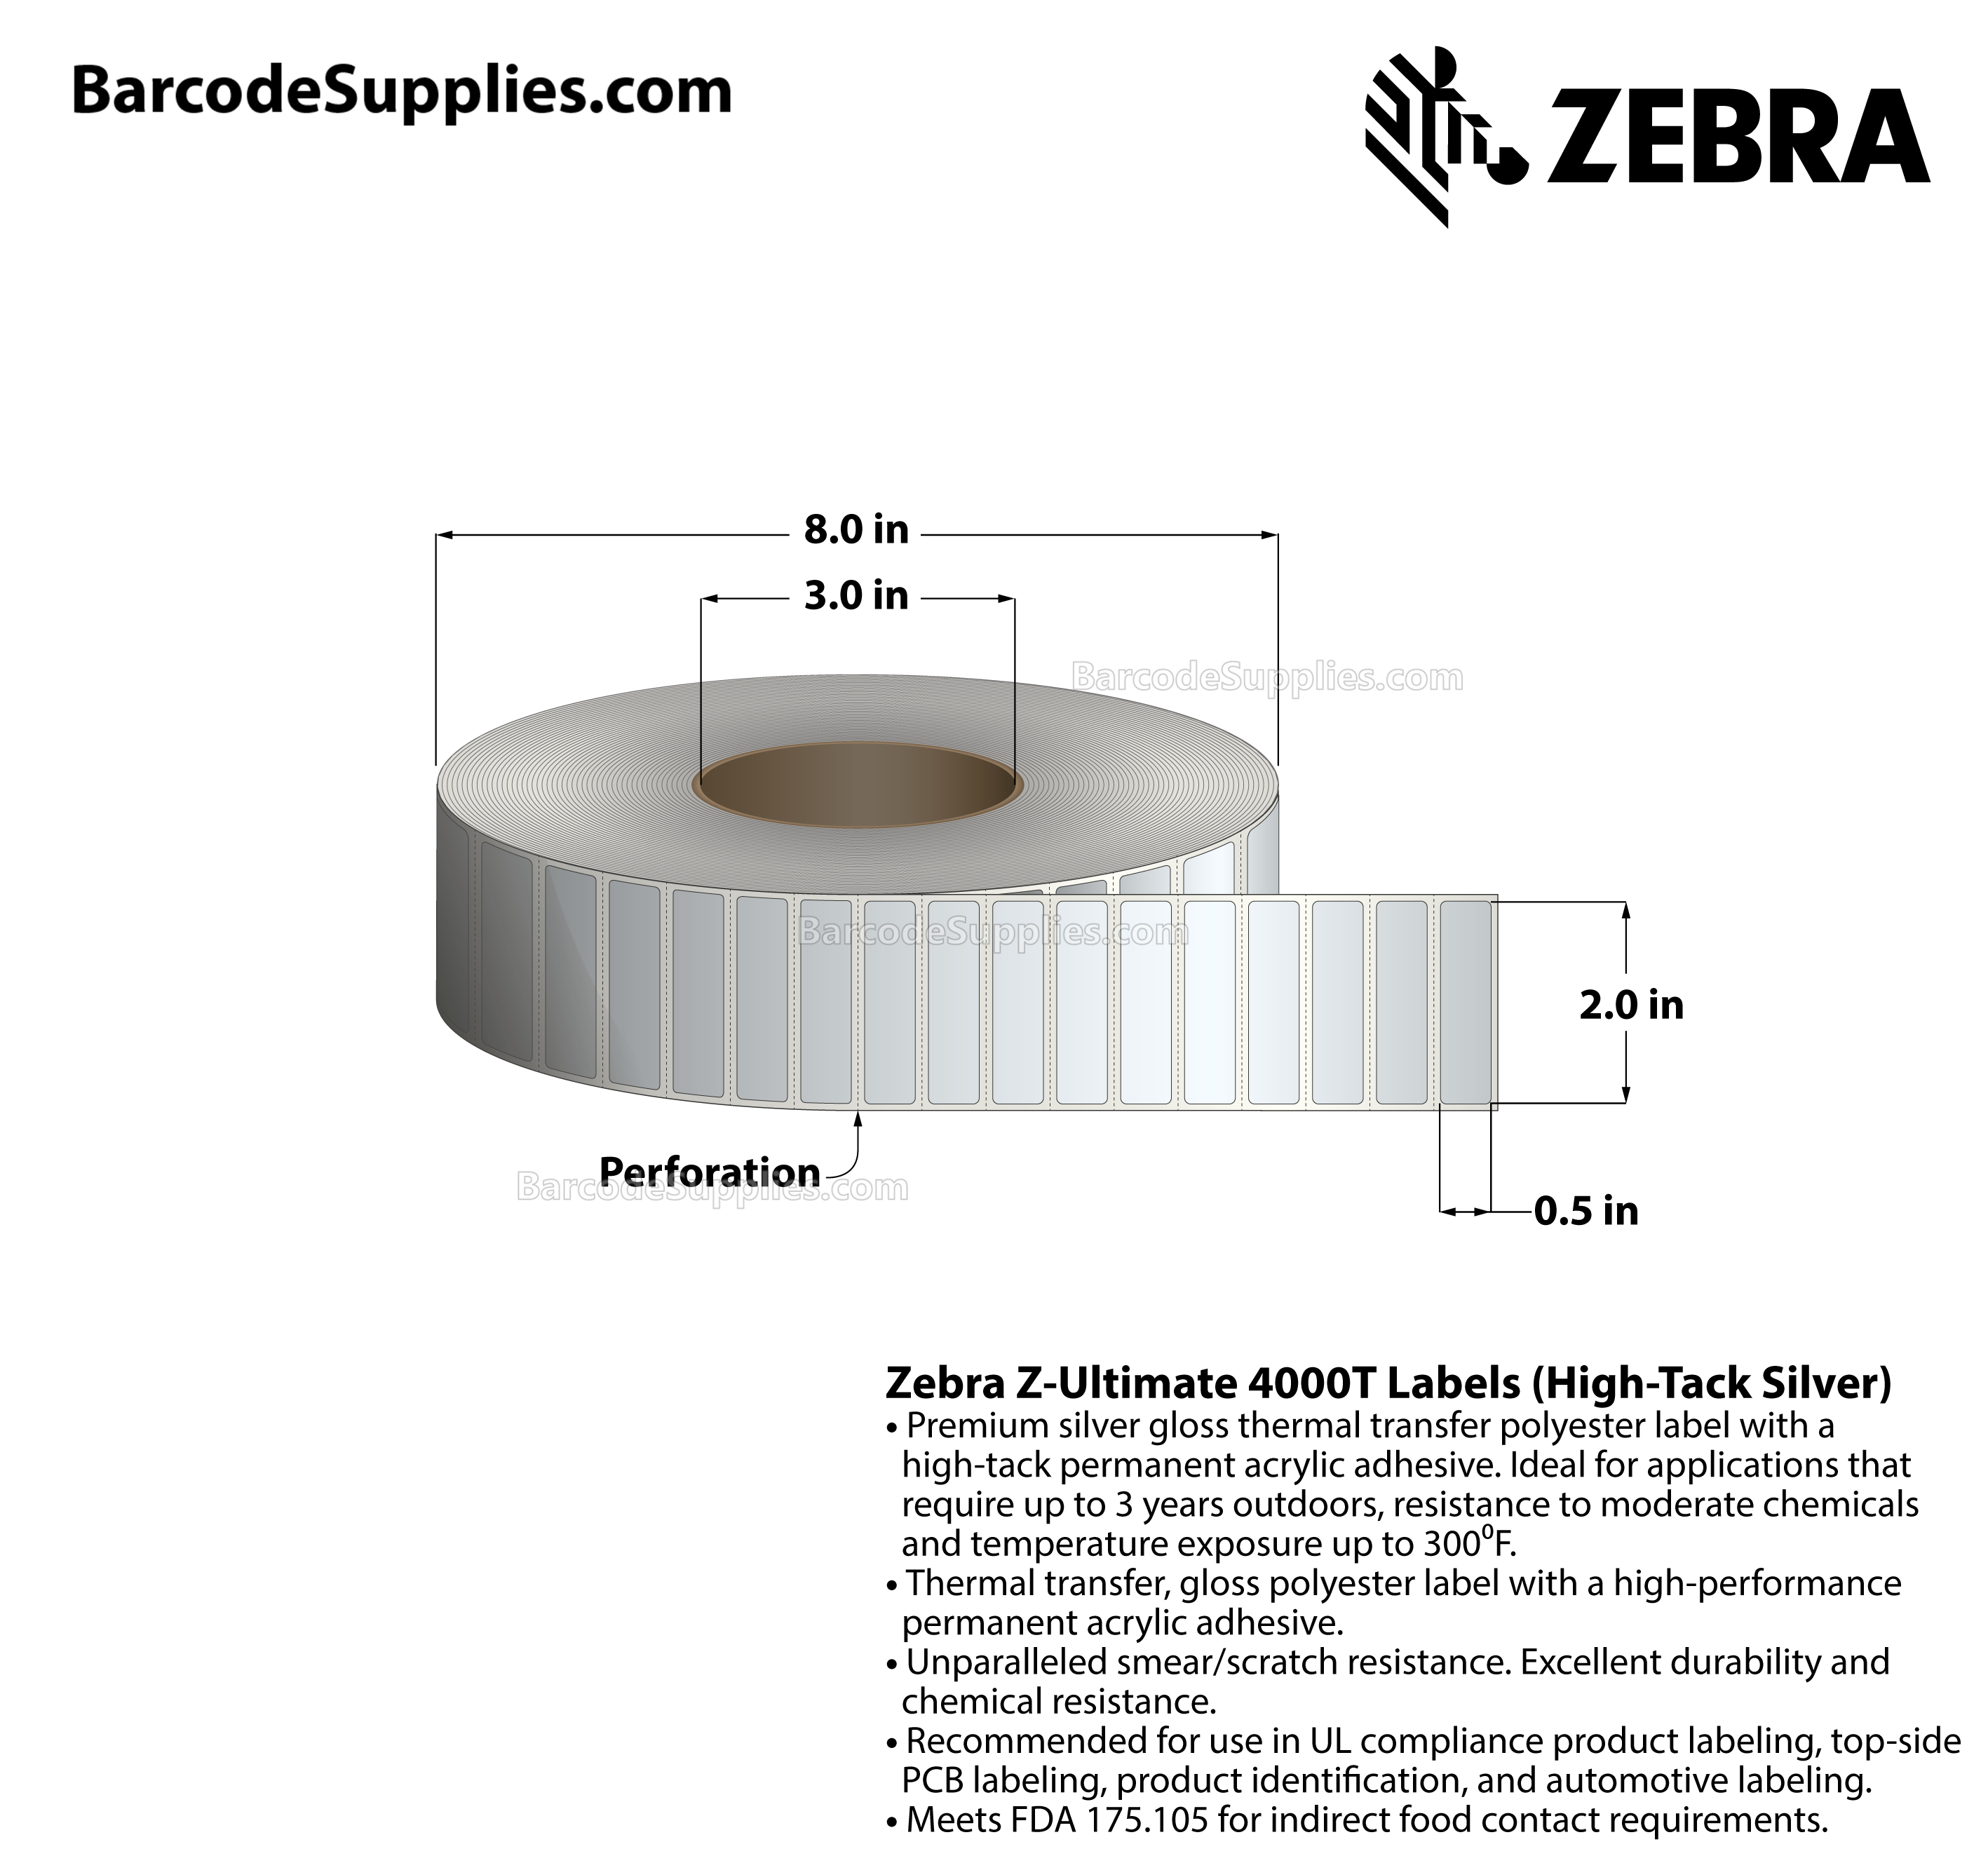 2 x 0.5 Thermal Transfer Silver Z-Ultimate 4000T High-Tack Silver Labels With High-tack Adhesive - Perforated - 3000 Labels Per Roll - Carton Of 1 Rolls - 3000 Labels Total - MPN: 10023351